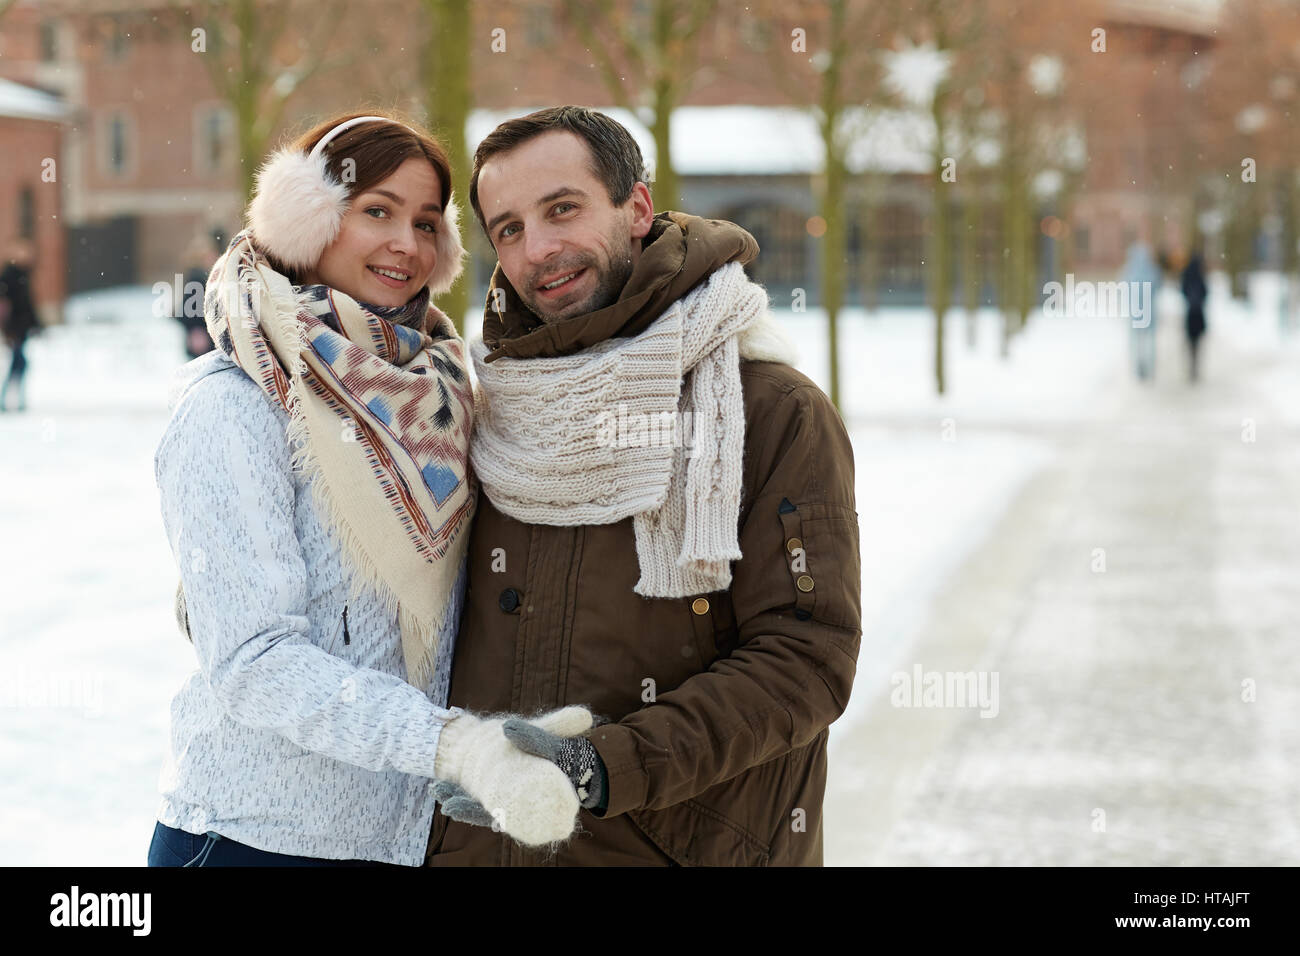 Amorous couple in embrace taking walk in park Stock Photo